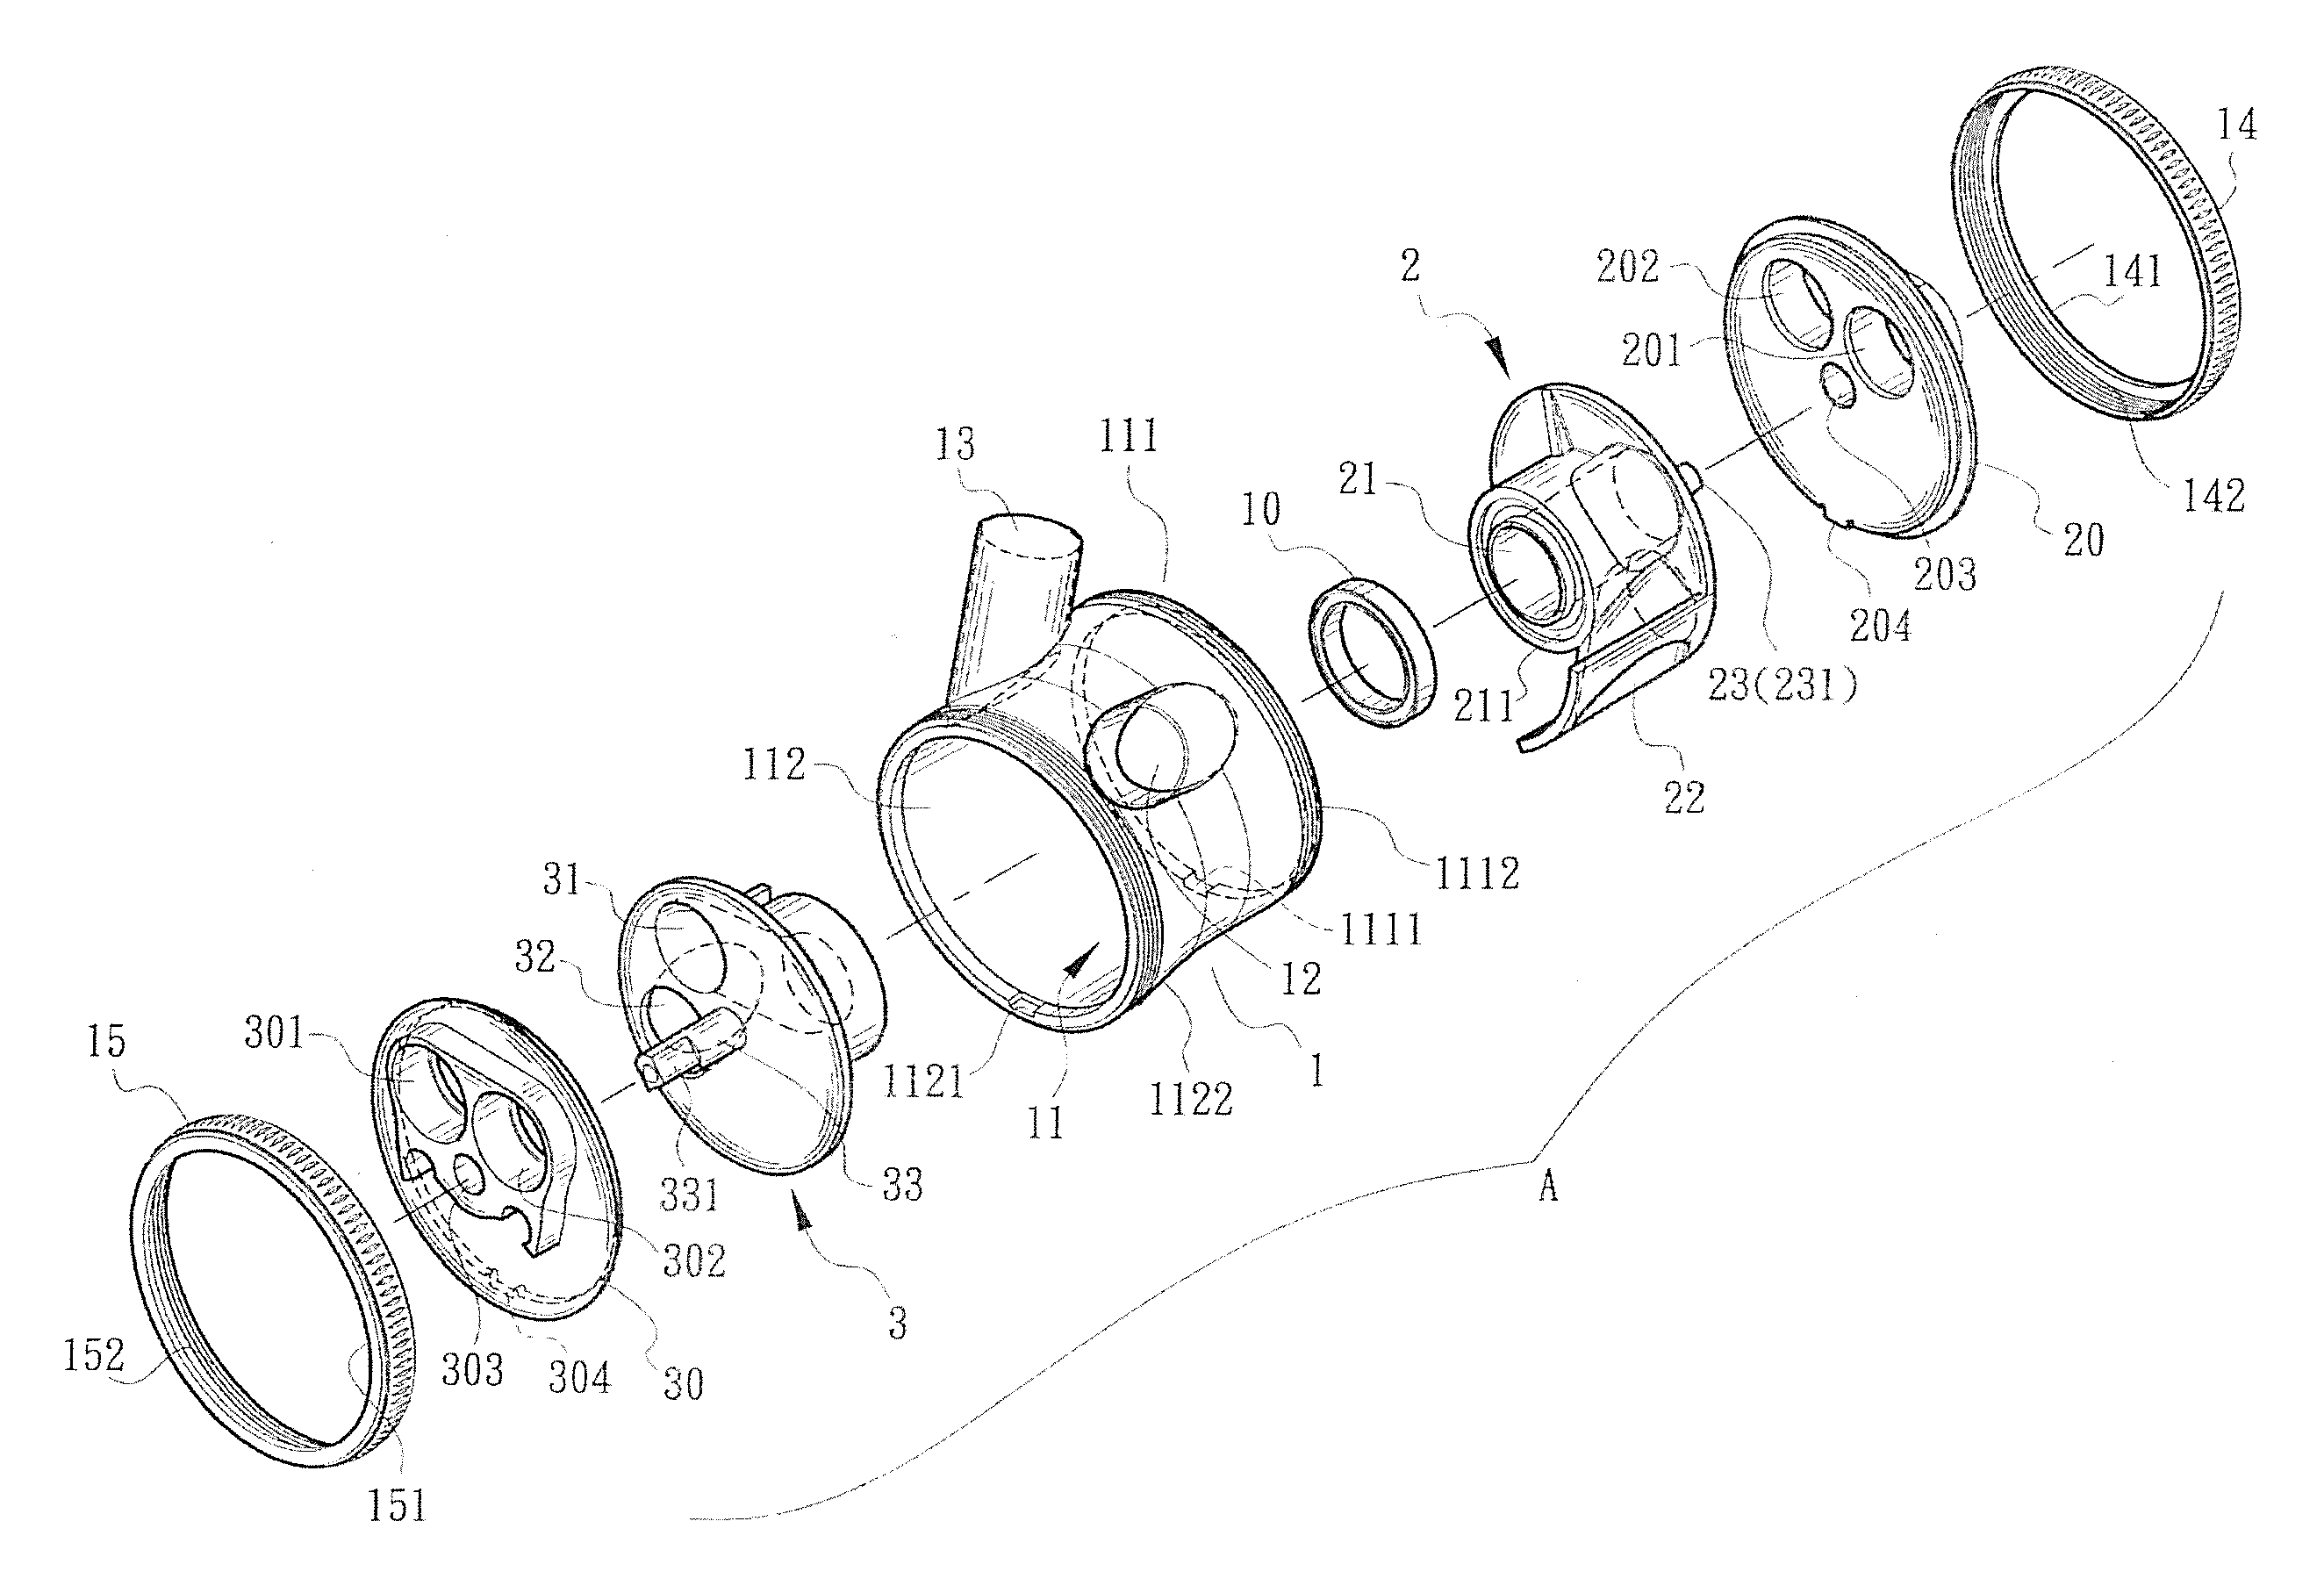 Dual rotor axial-flow rotor valve structure